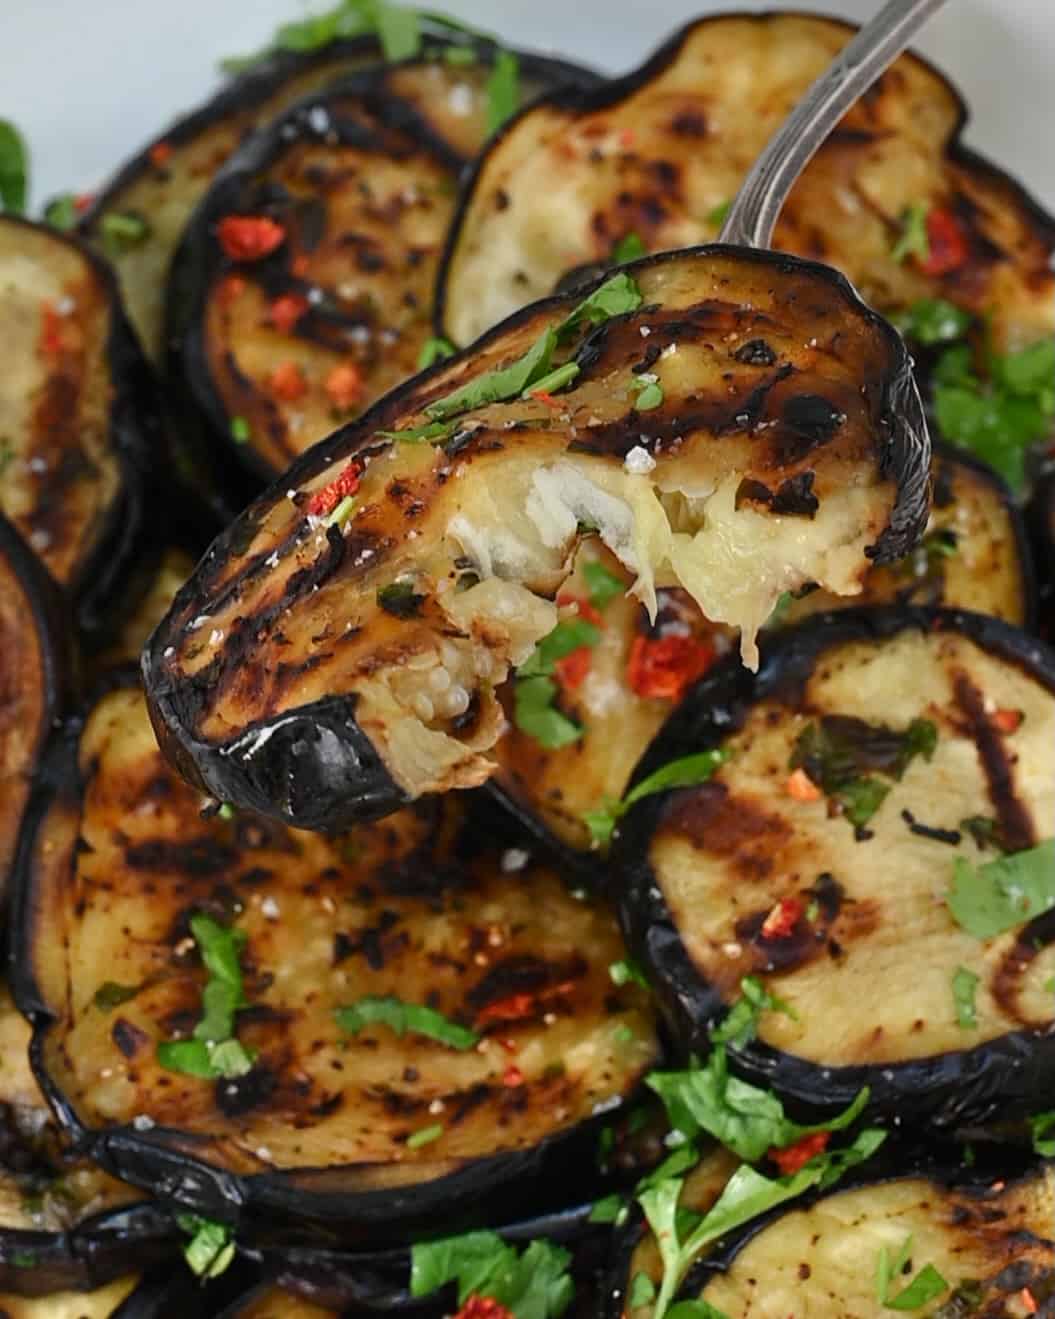 A close up of grilled eggplant slice